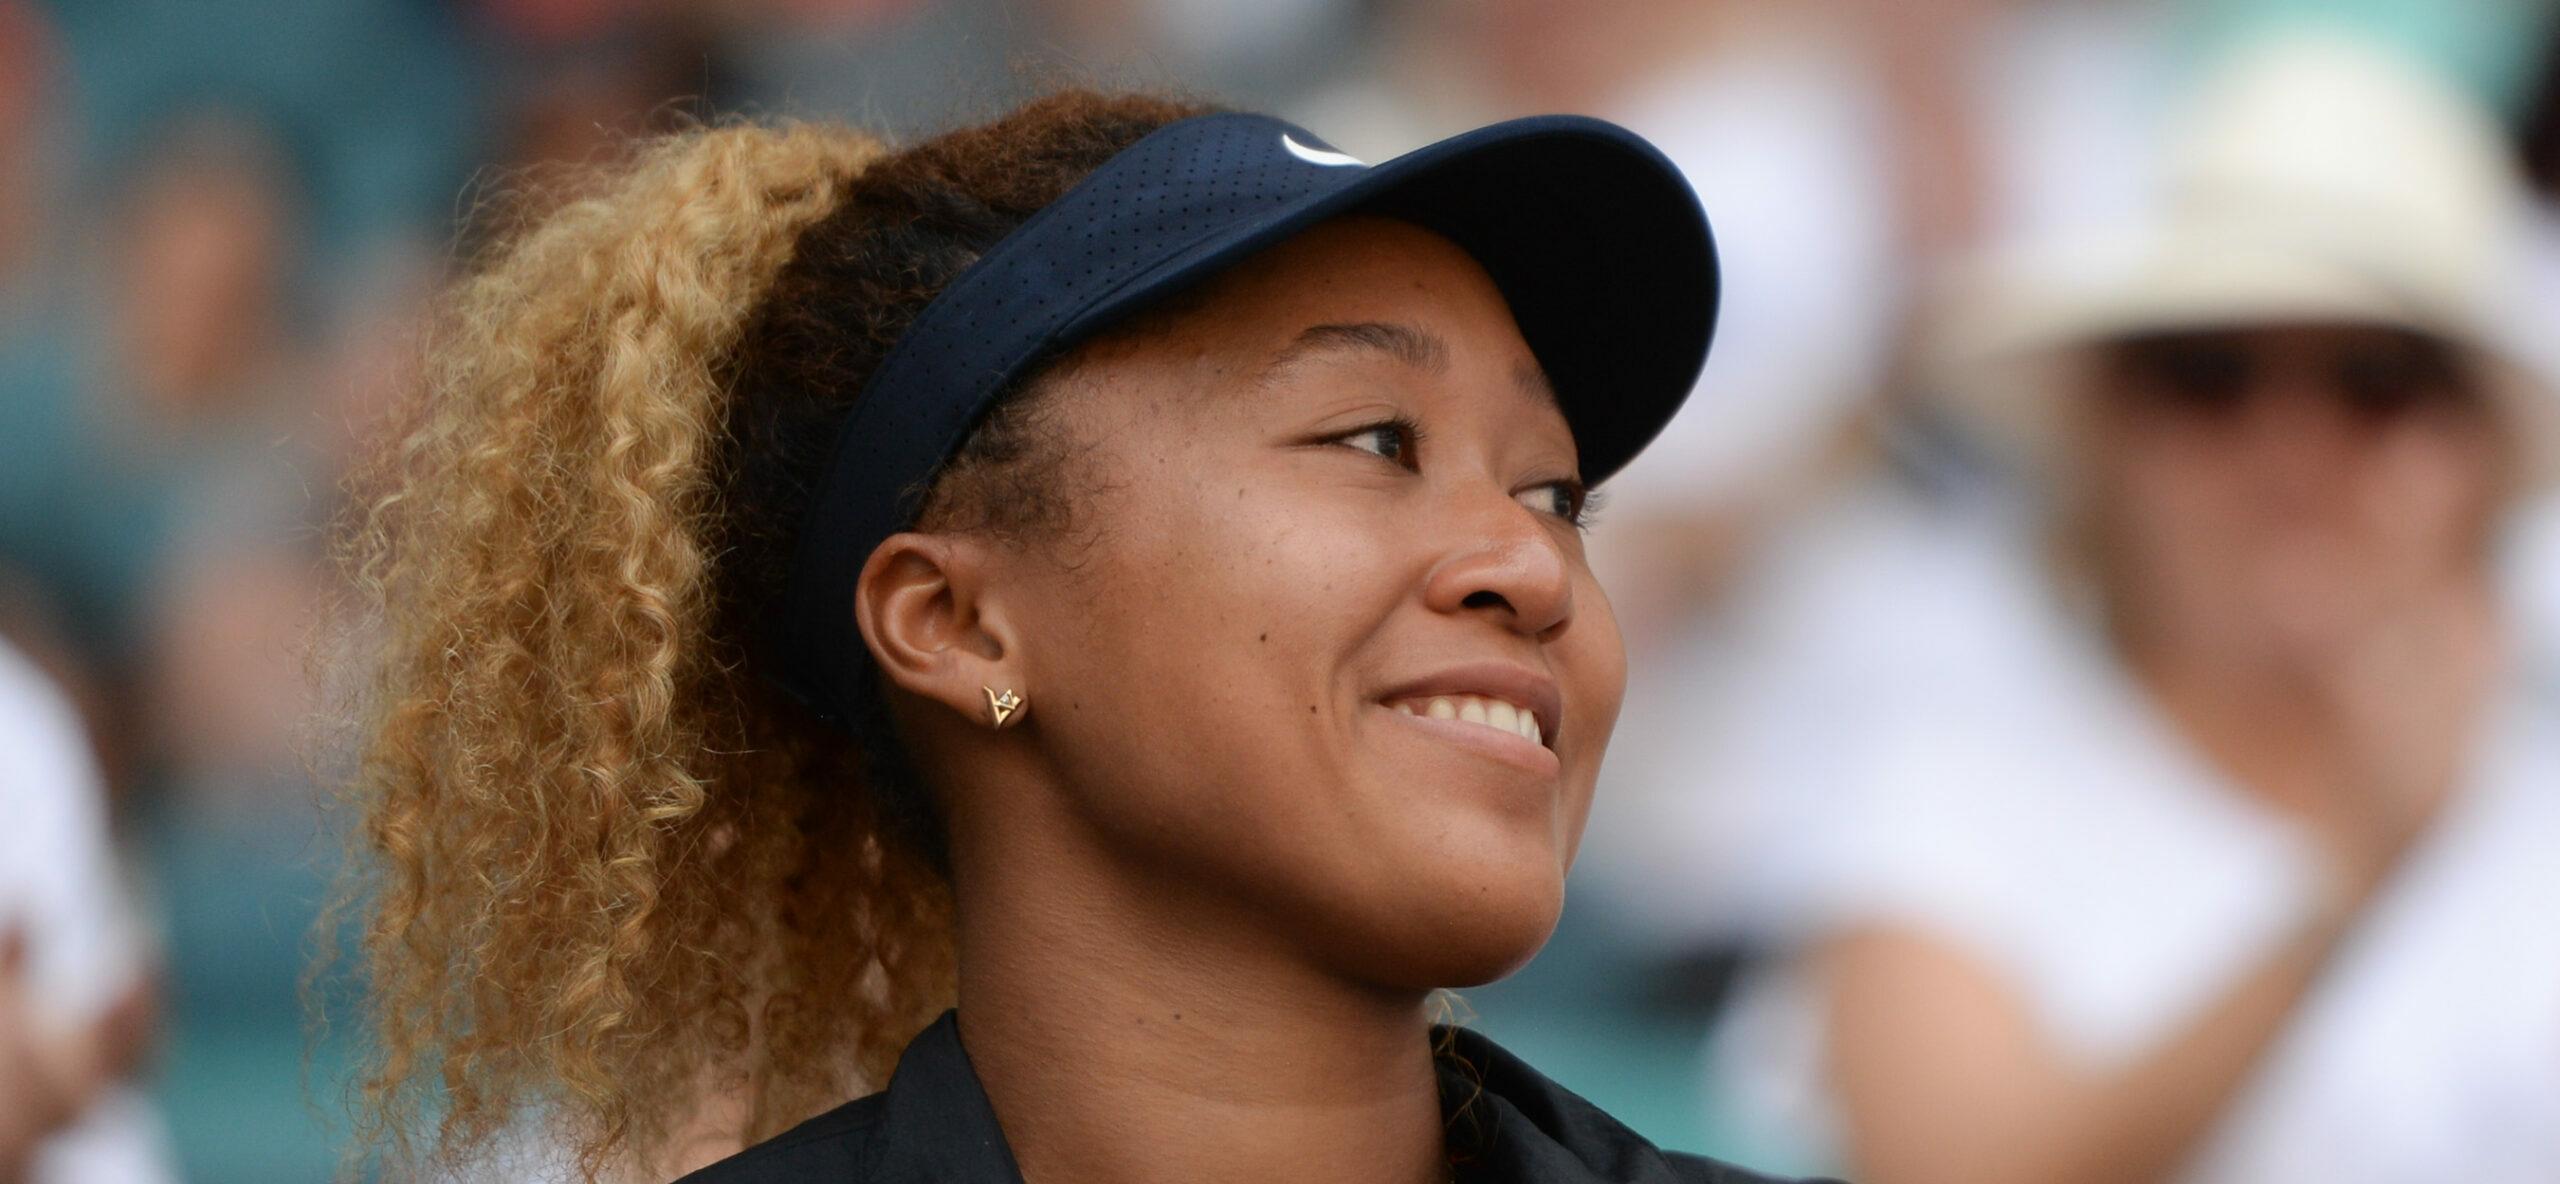 Naomi Osaka, who is currently pregnant with her first child